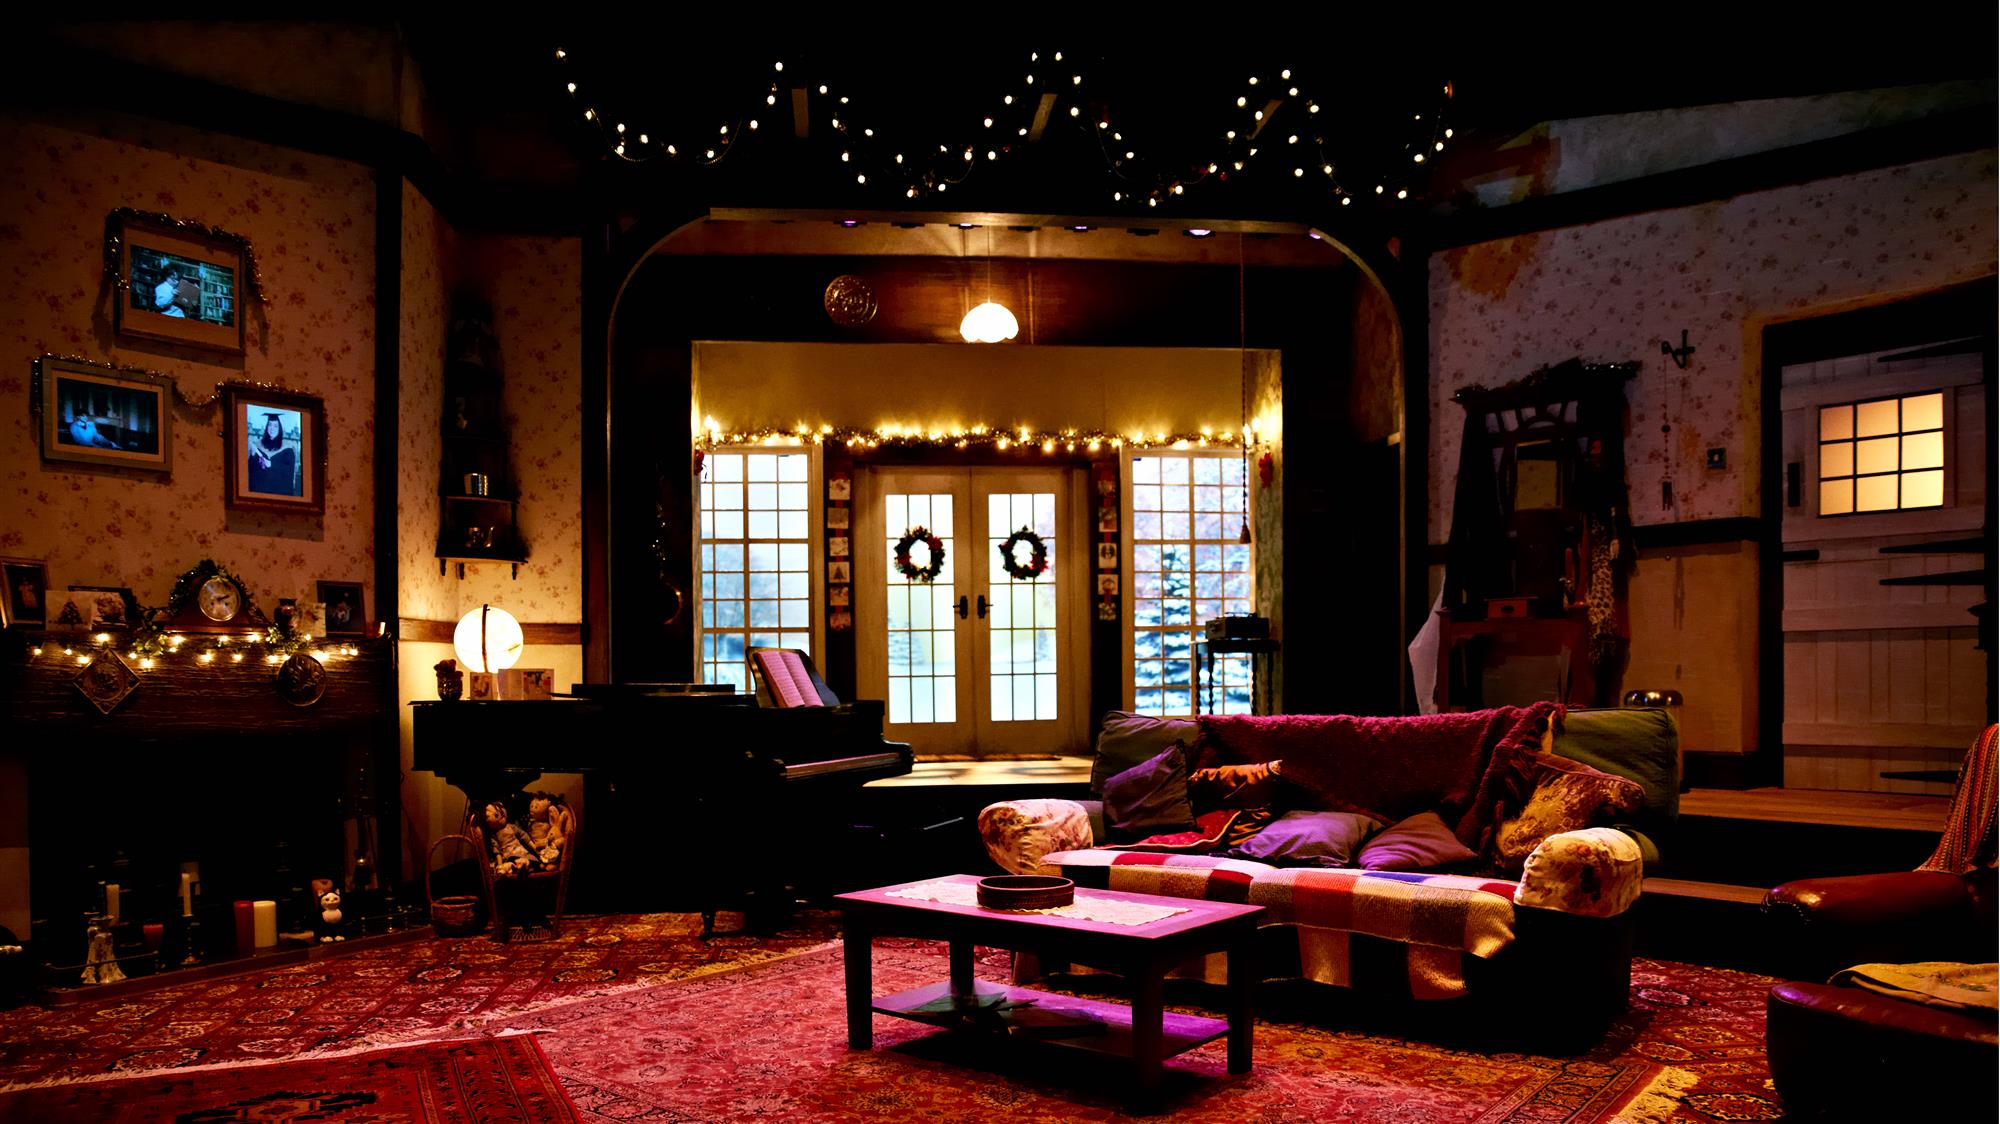 Photo of set design of The Christmas Carol, 2013, with a cozy home's interior with Christmas decorations